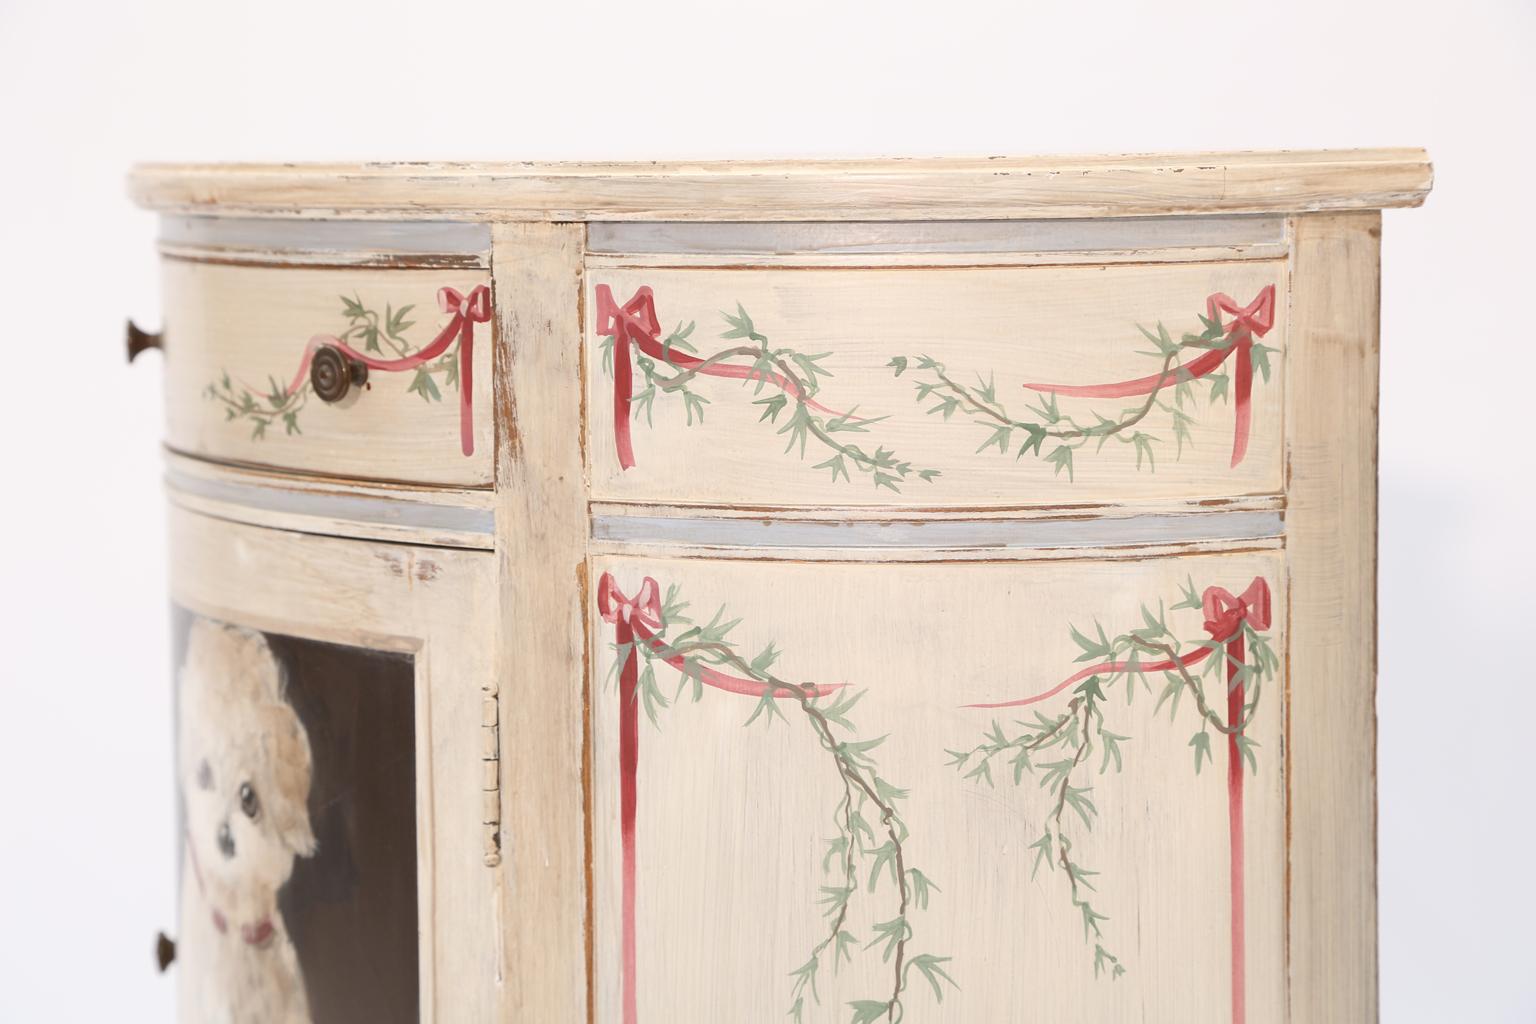 Mahogany Demilune Cabinet Hand-Painted with Dogs